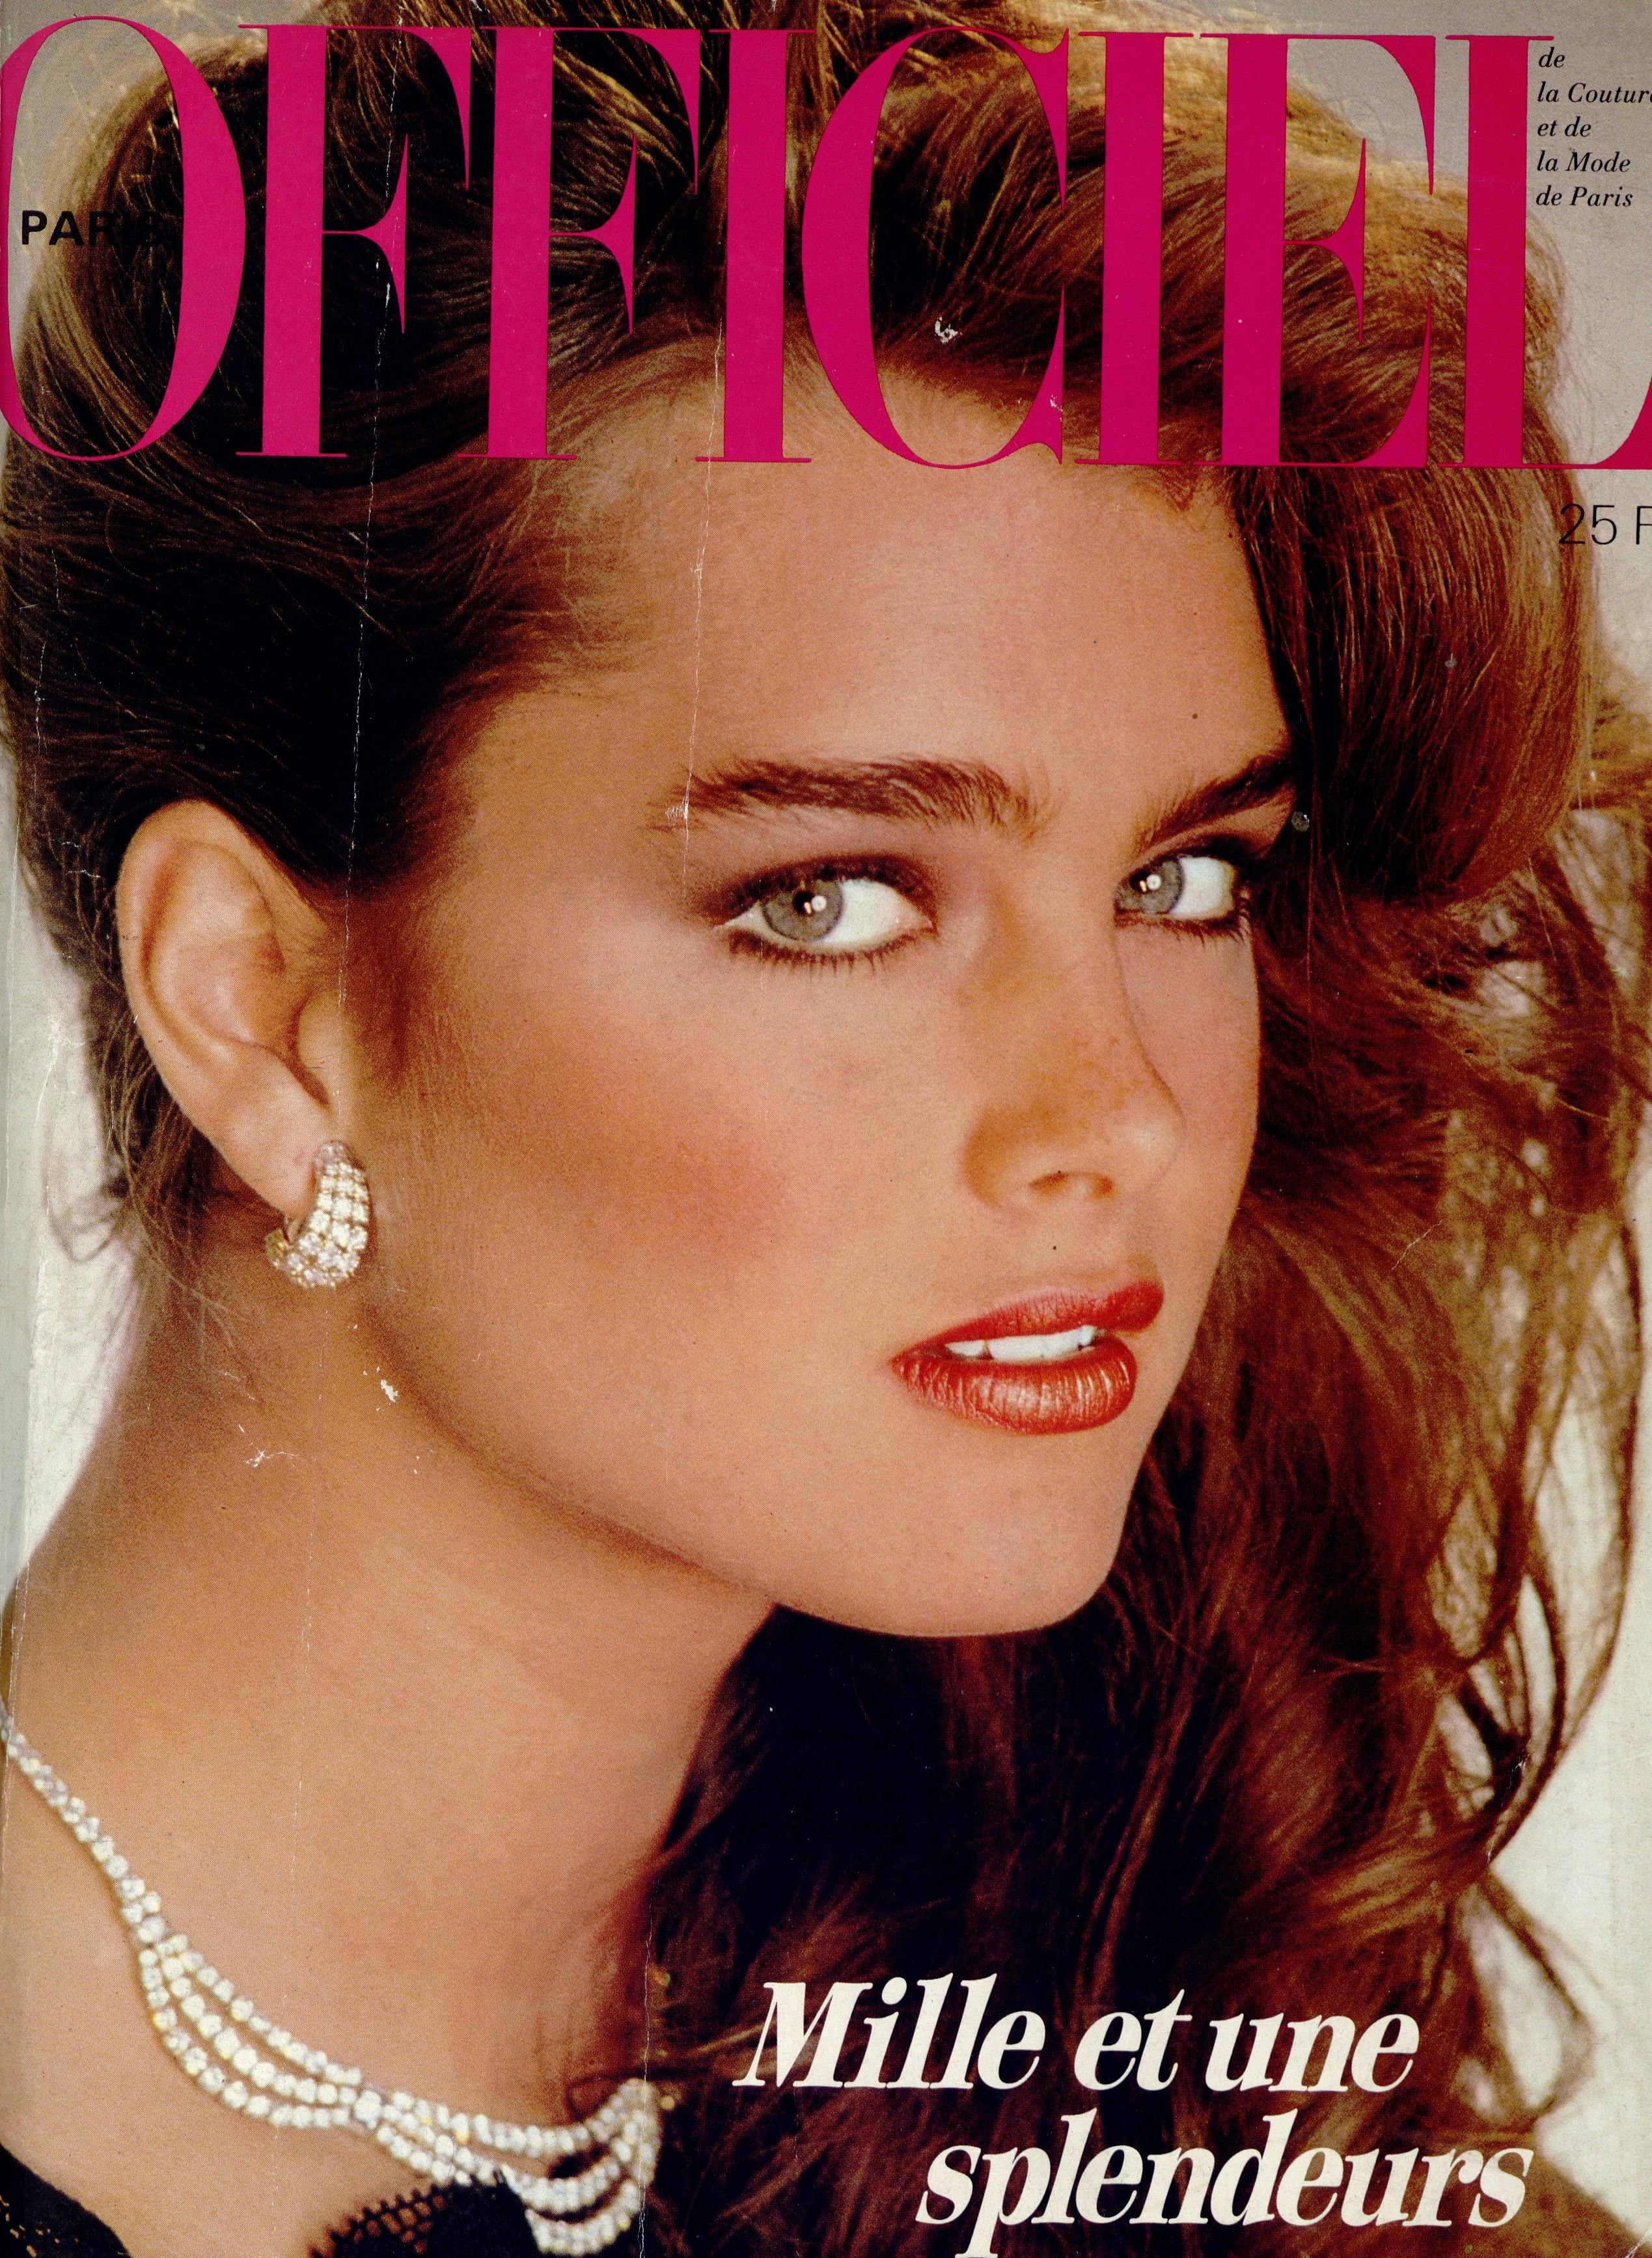 From the Cover of L'OFFICIEL to Her Calvin Klein Ad: Photos of Young Brooke  Shields